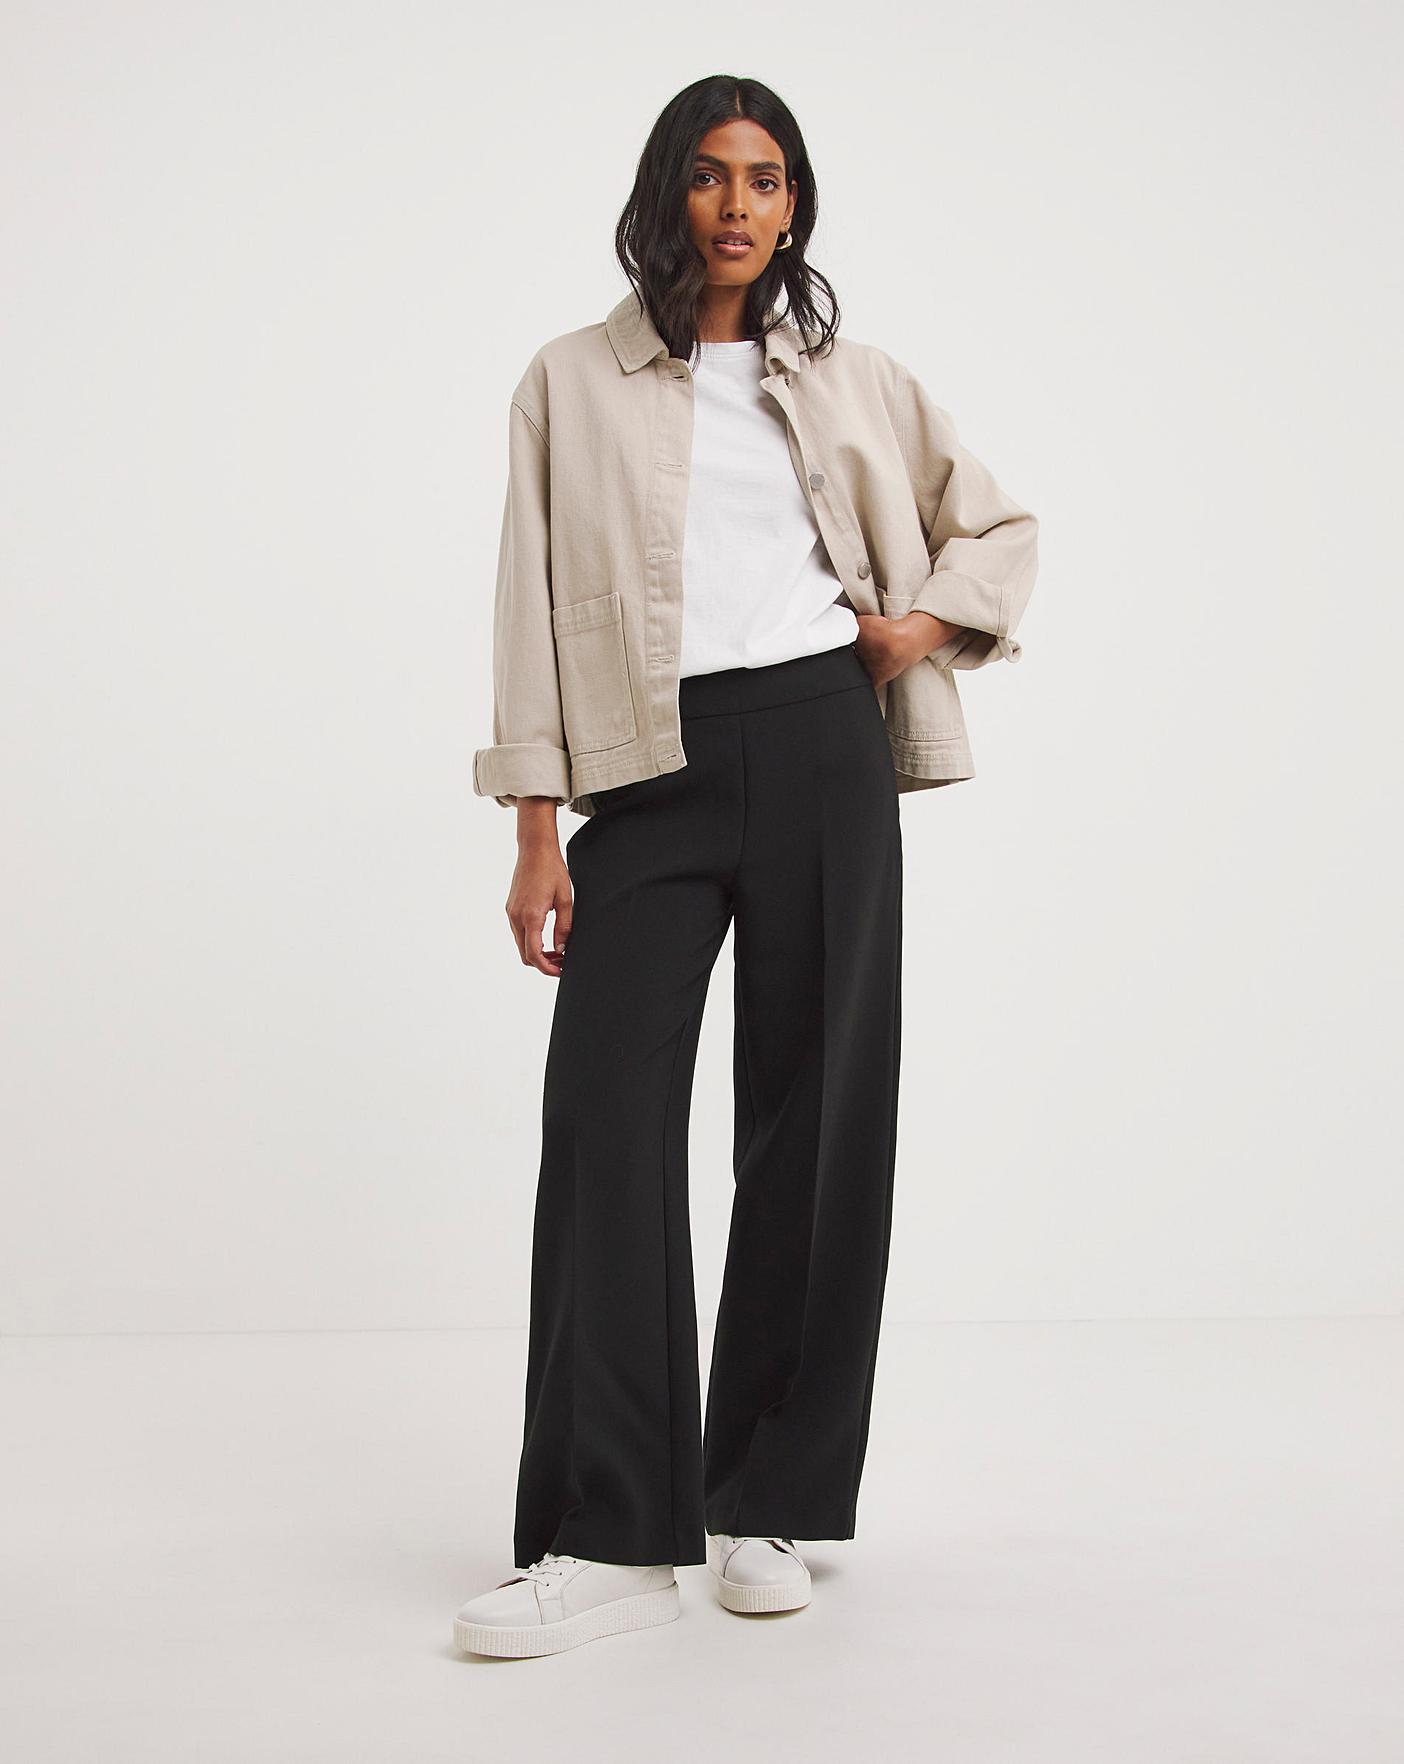 Shop for Brown  Trousers  Womens  online at Lookagain